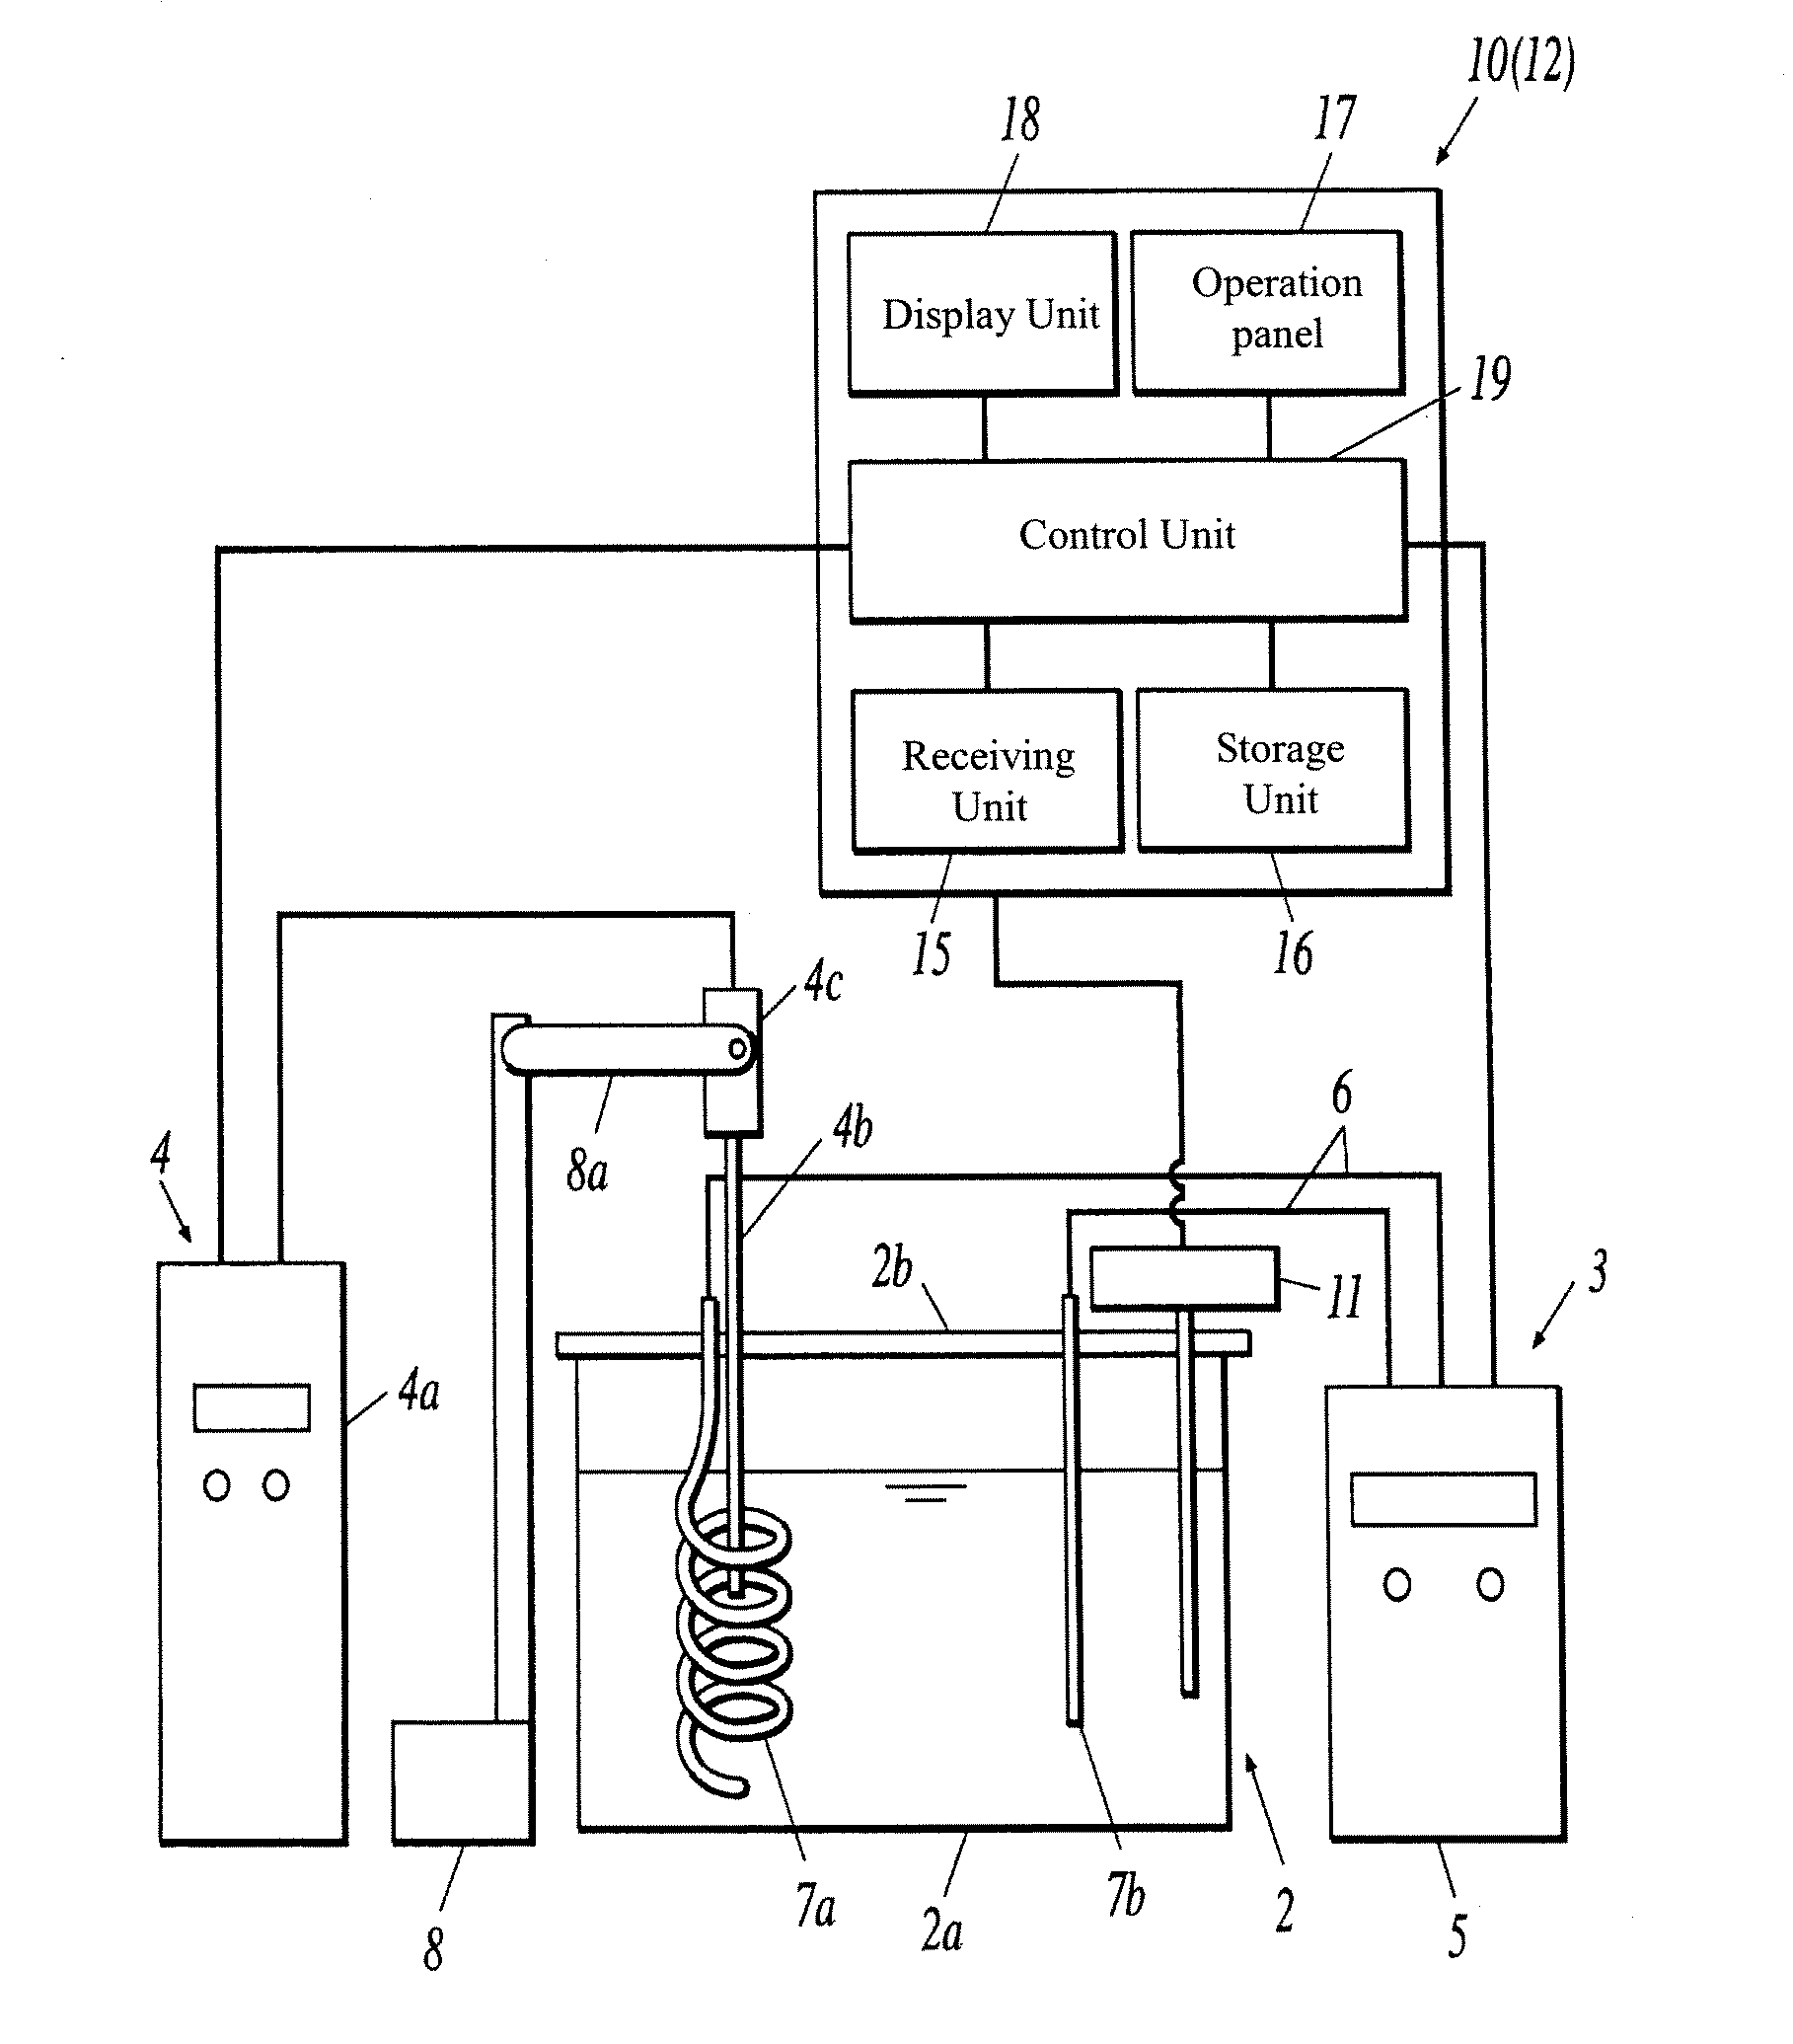 Process for producing solution having carbon dioxide dissolved therein, apparatus therefor and carbonated water